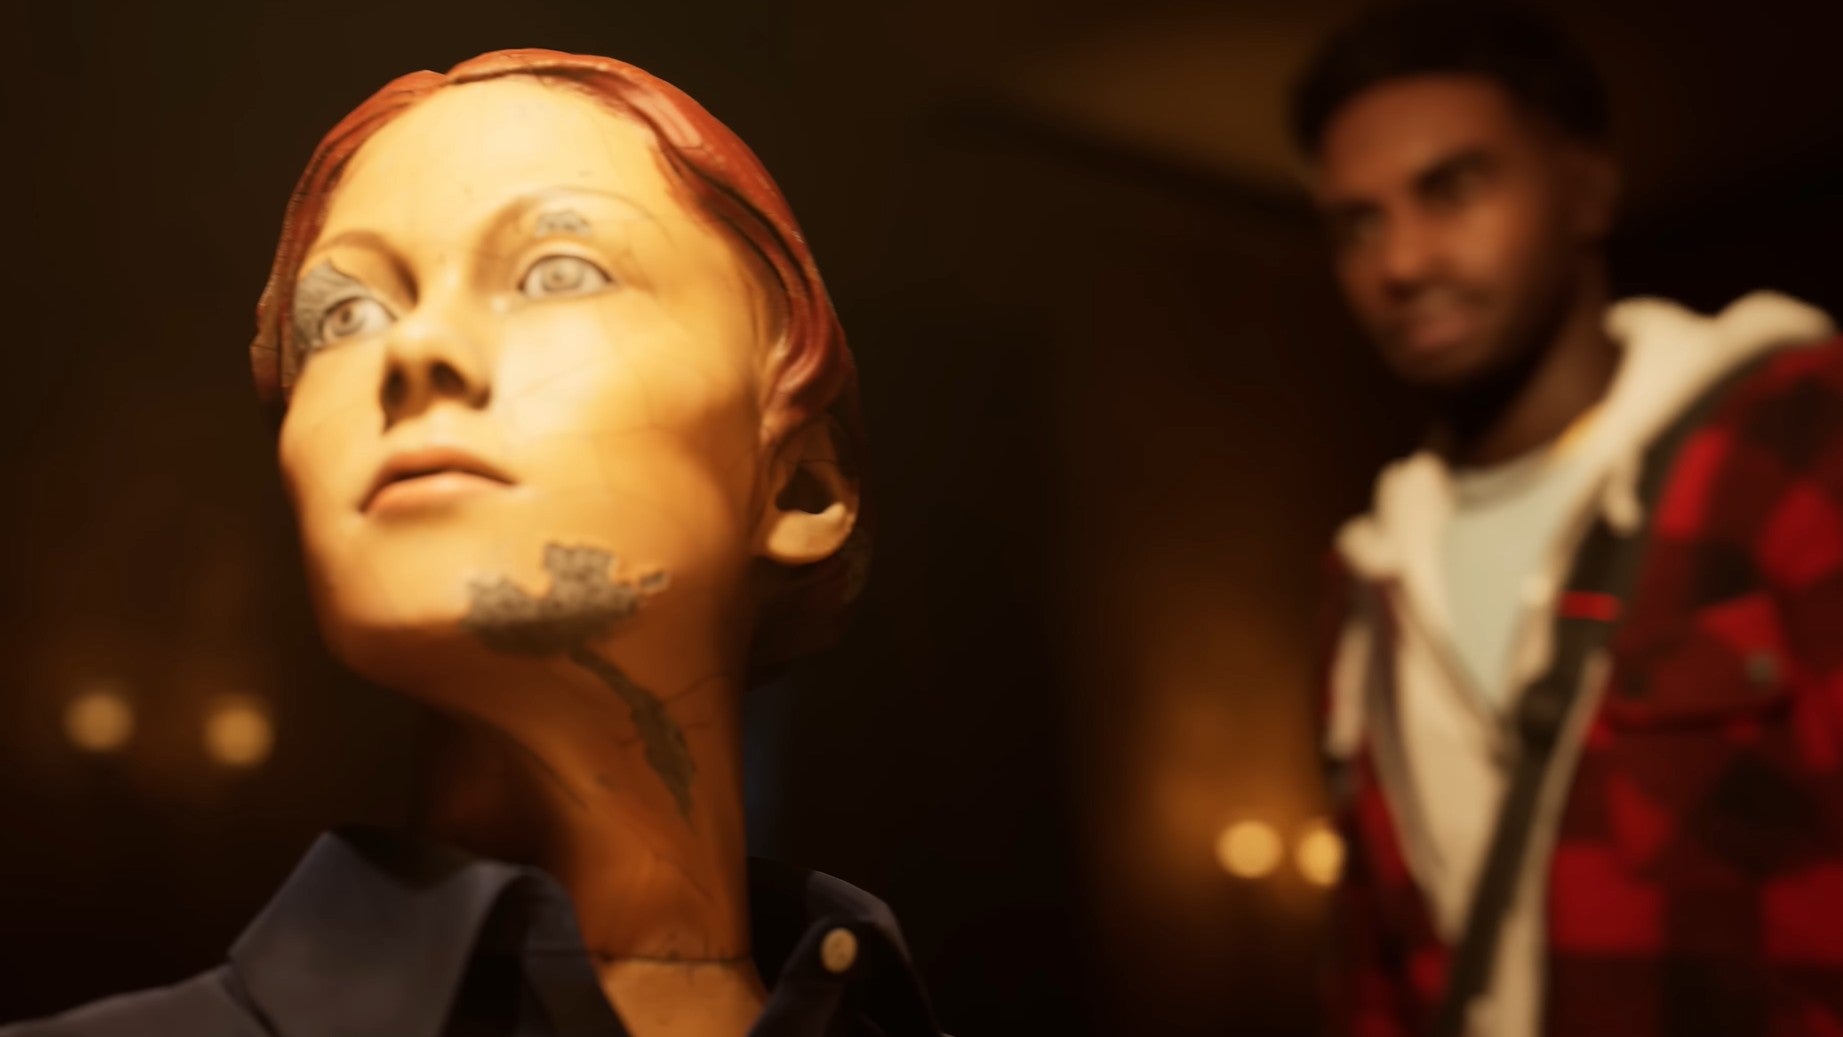 Image for Supermassive's next game The Devil in Me releases this autumn